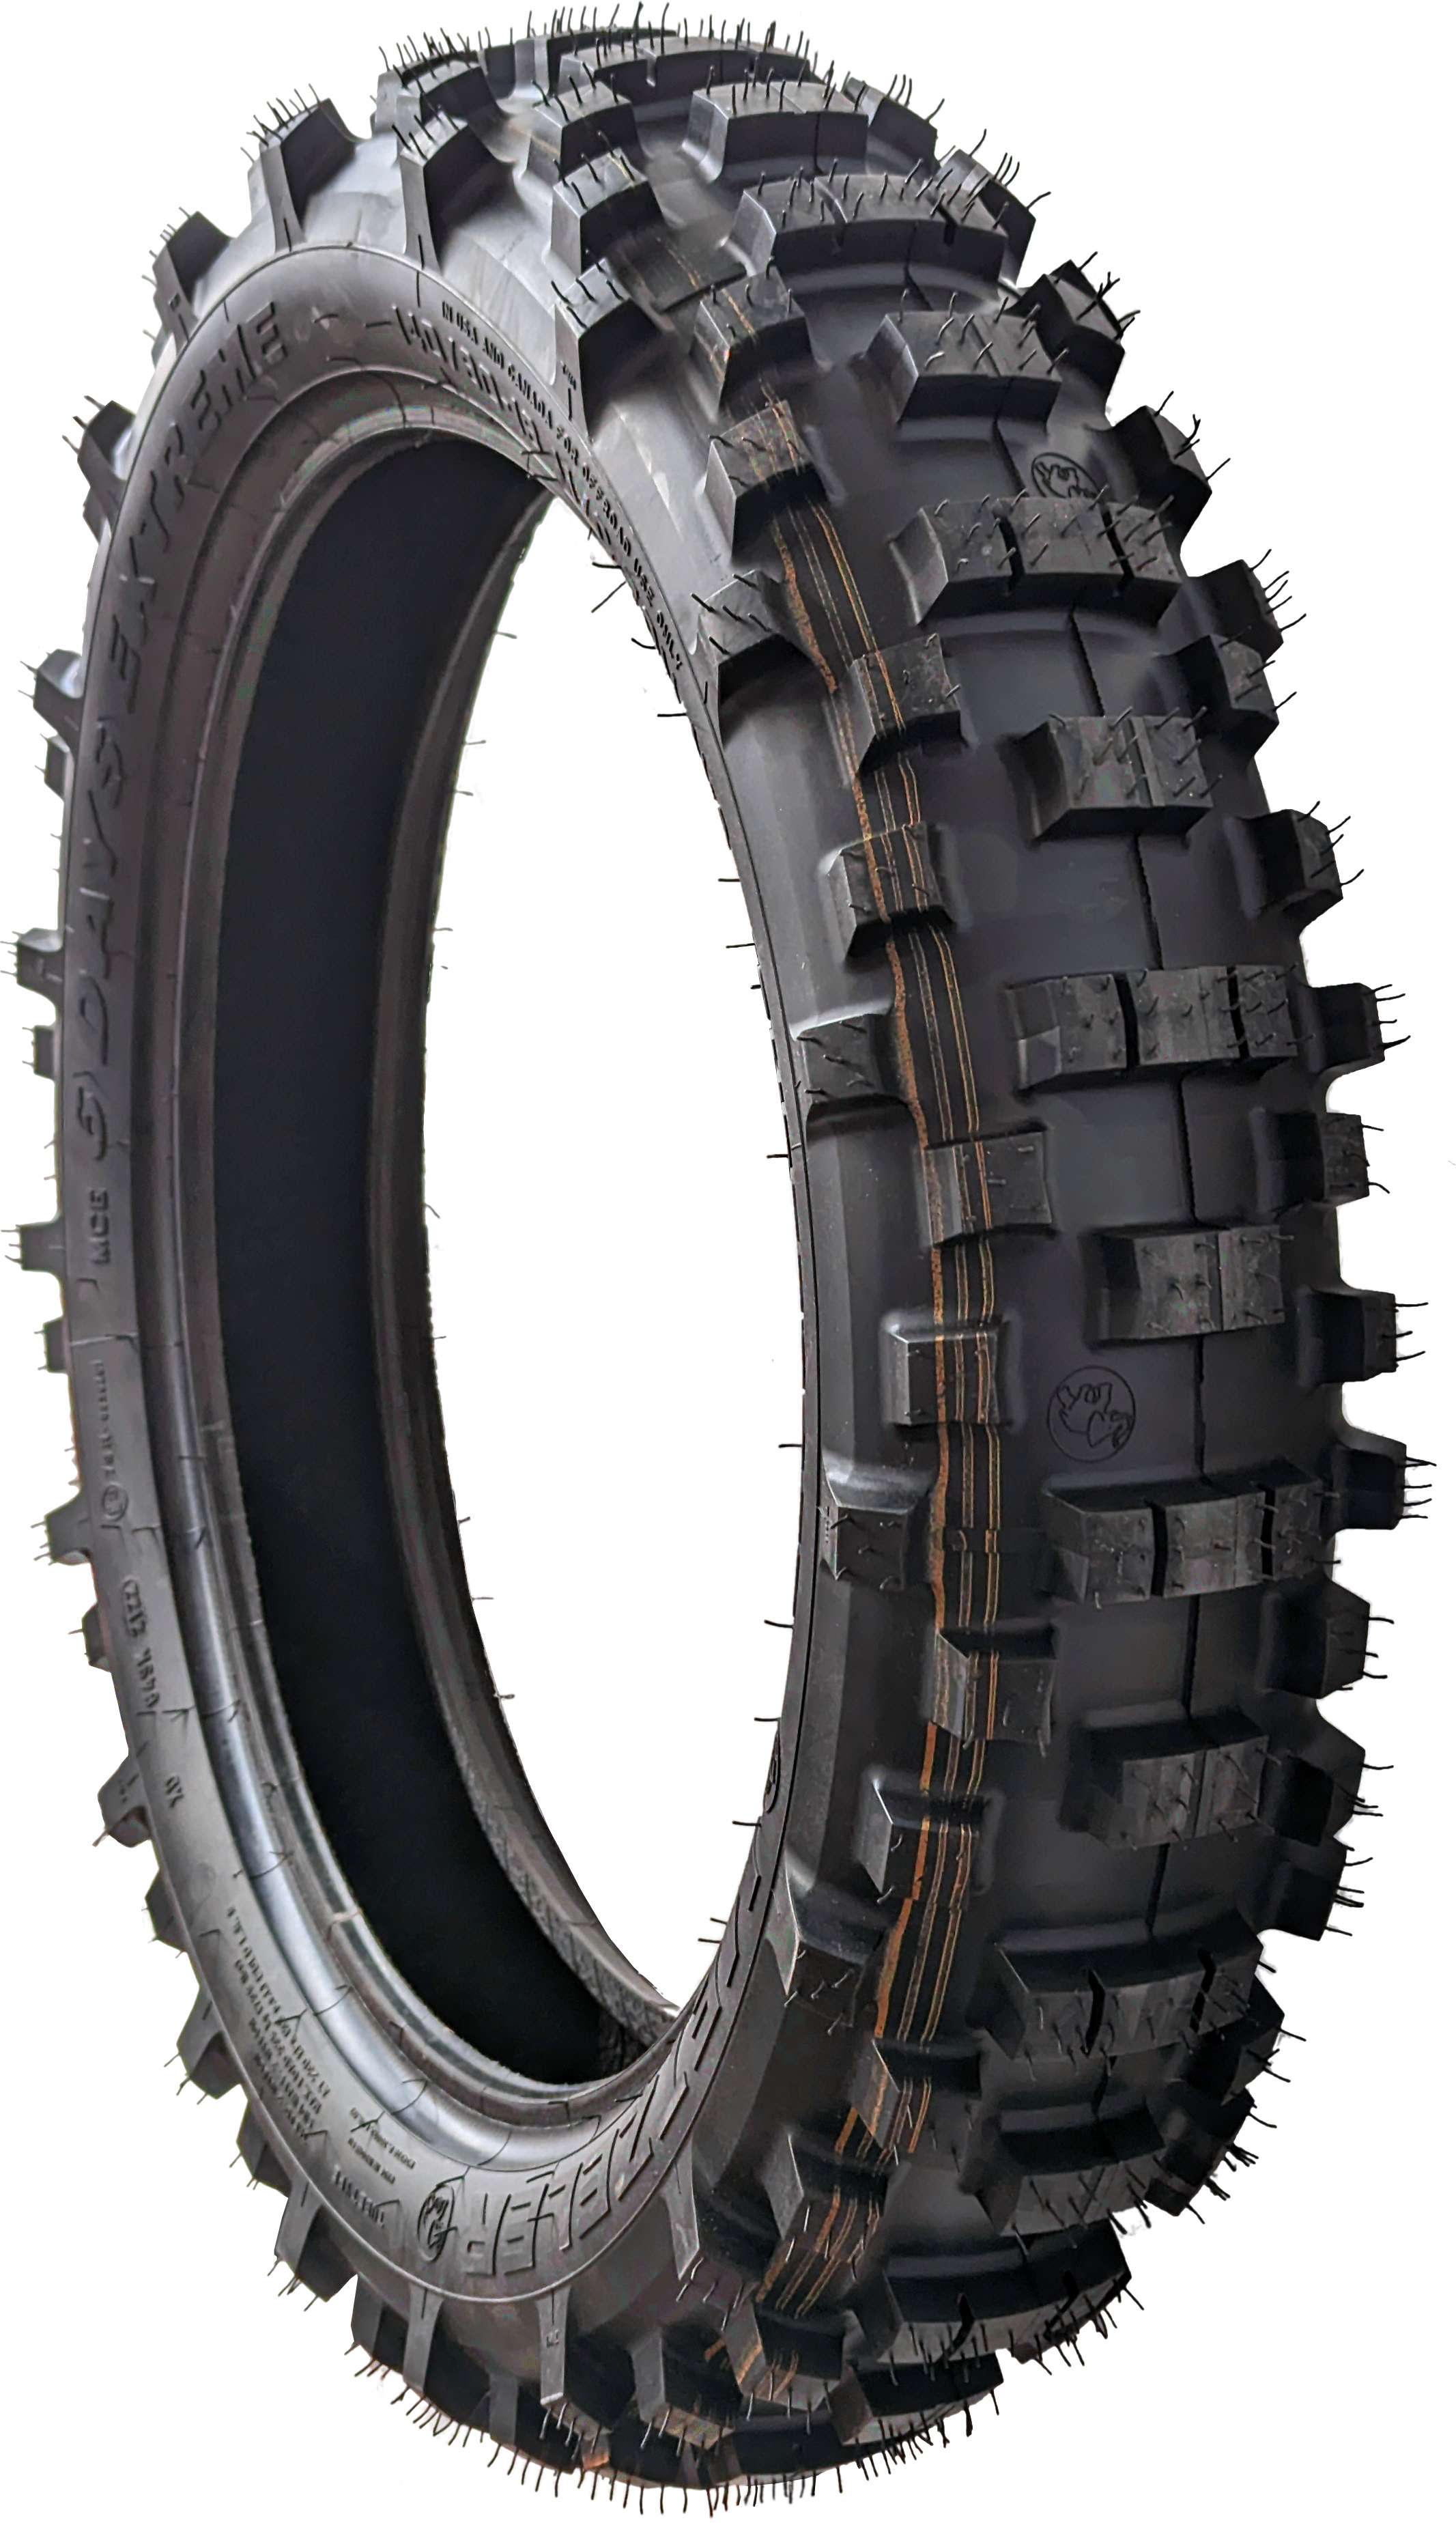 140/80-18 Six Days Extreme Rear Tire - Soft - M/C 70M M+S - Click Image to Close